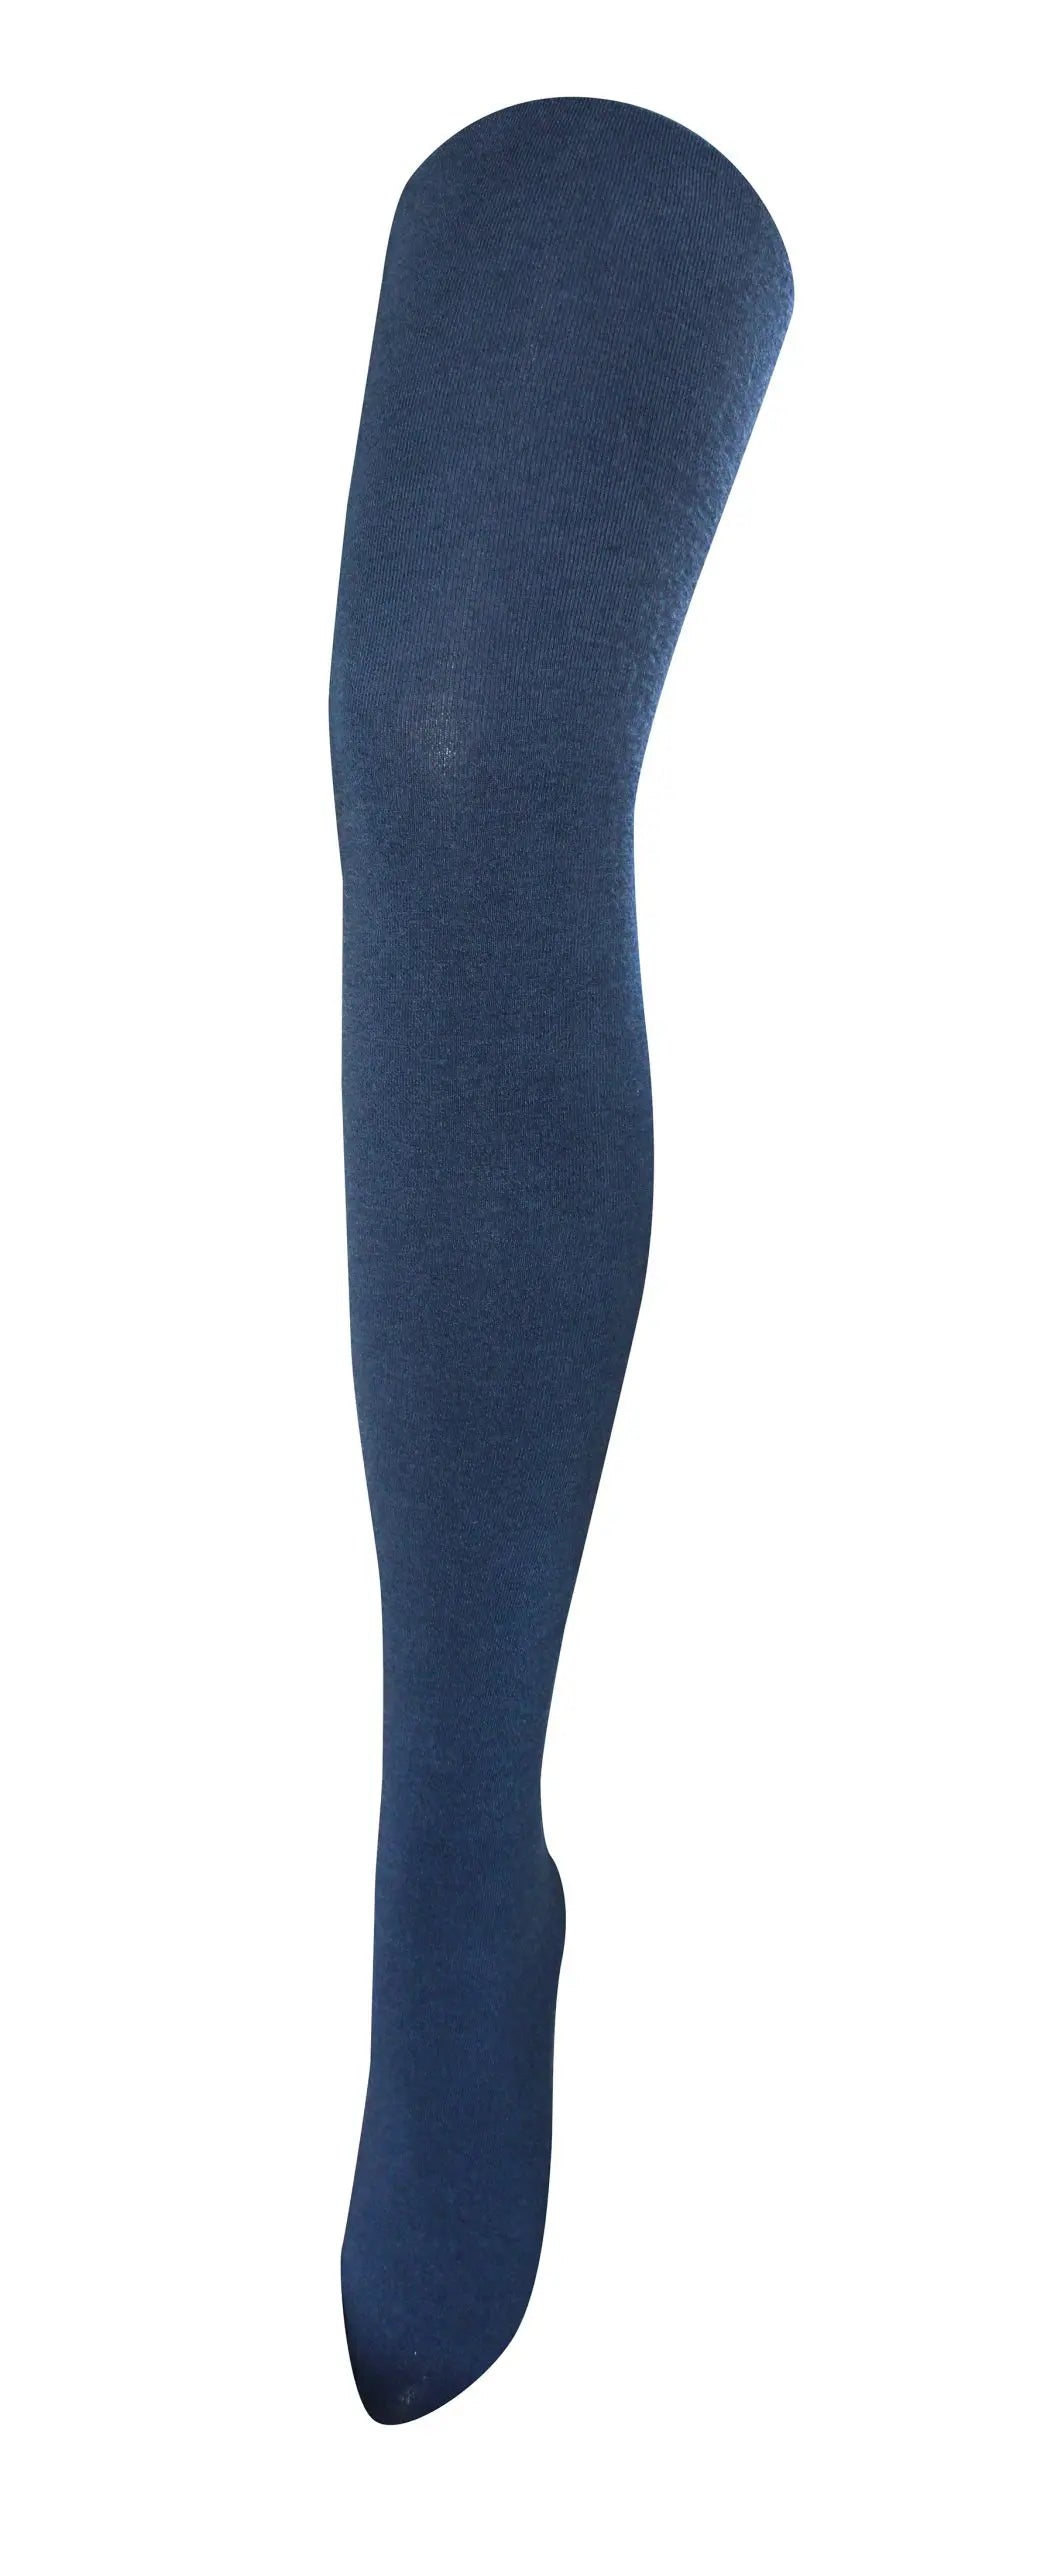 Tightology - Luxe Wool Tights - Slate